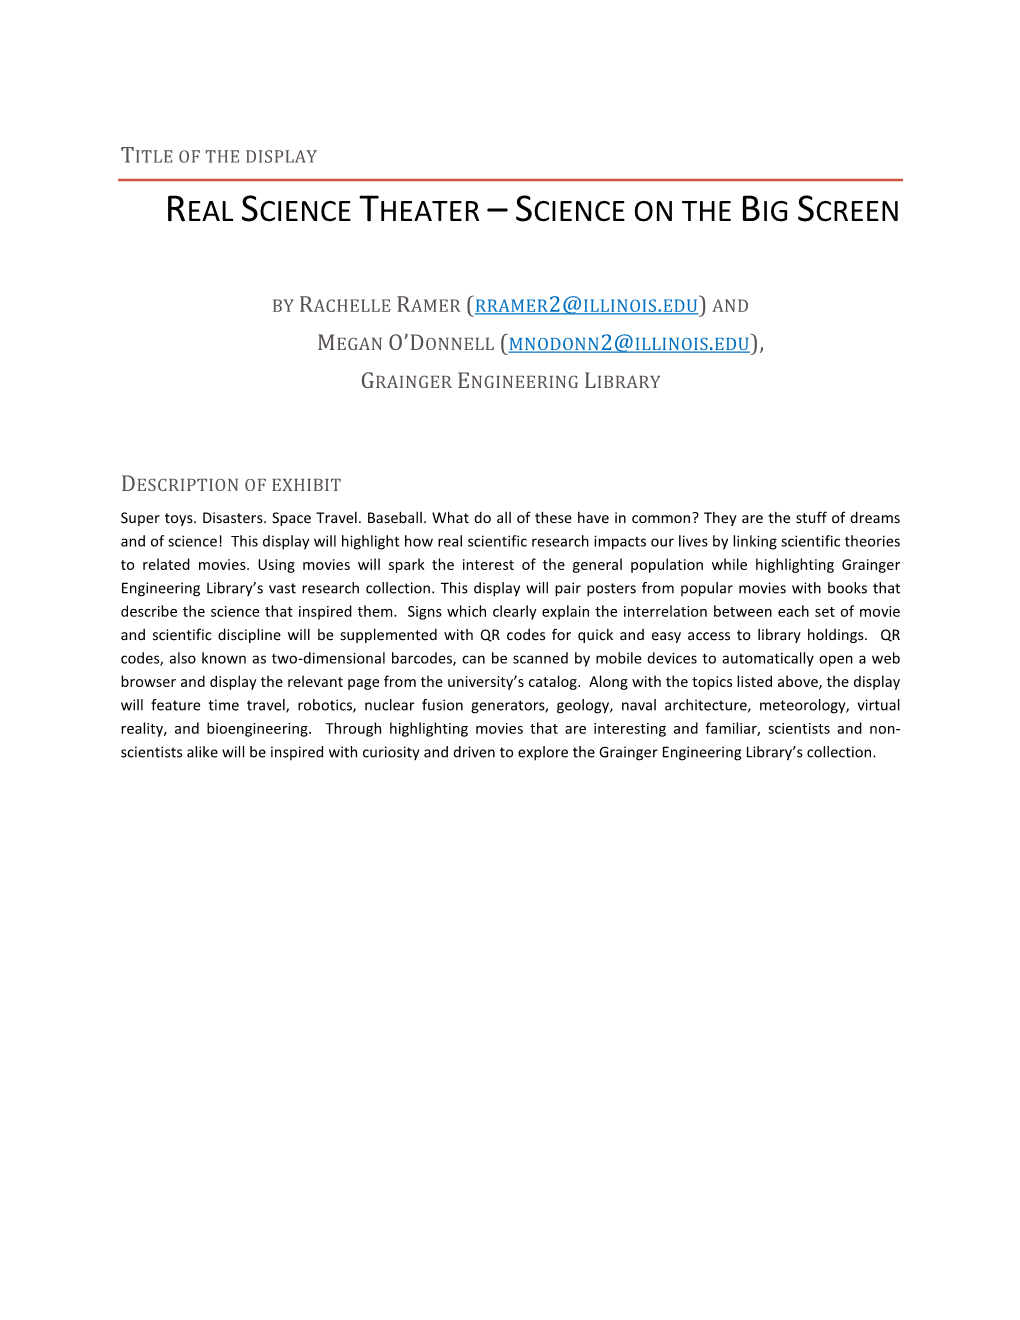 Real Science Theater –Science on the Big Screen